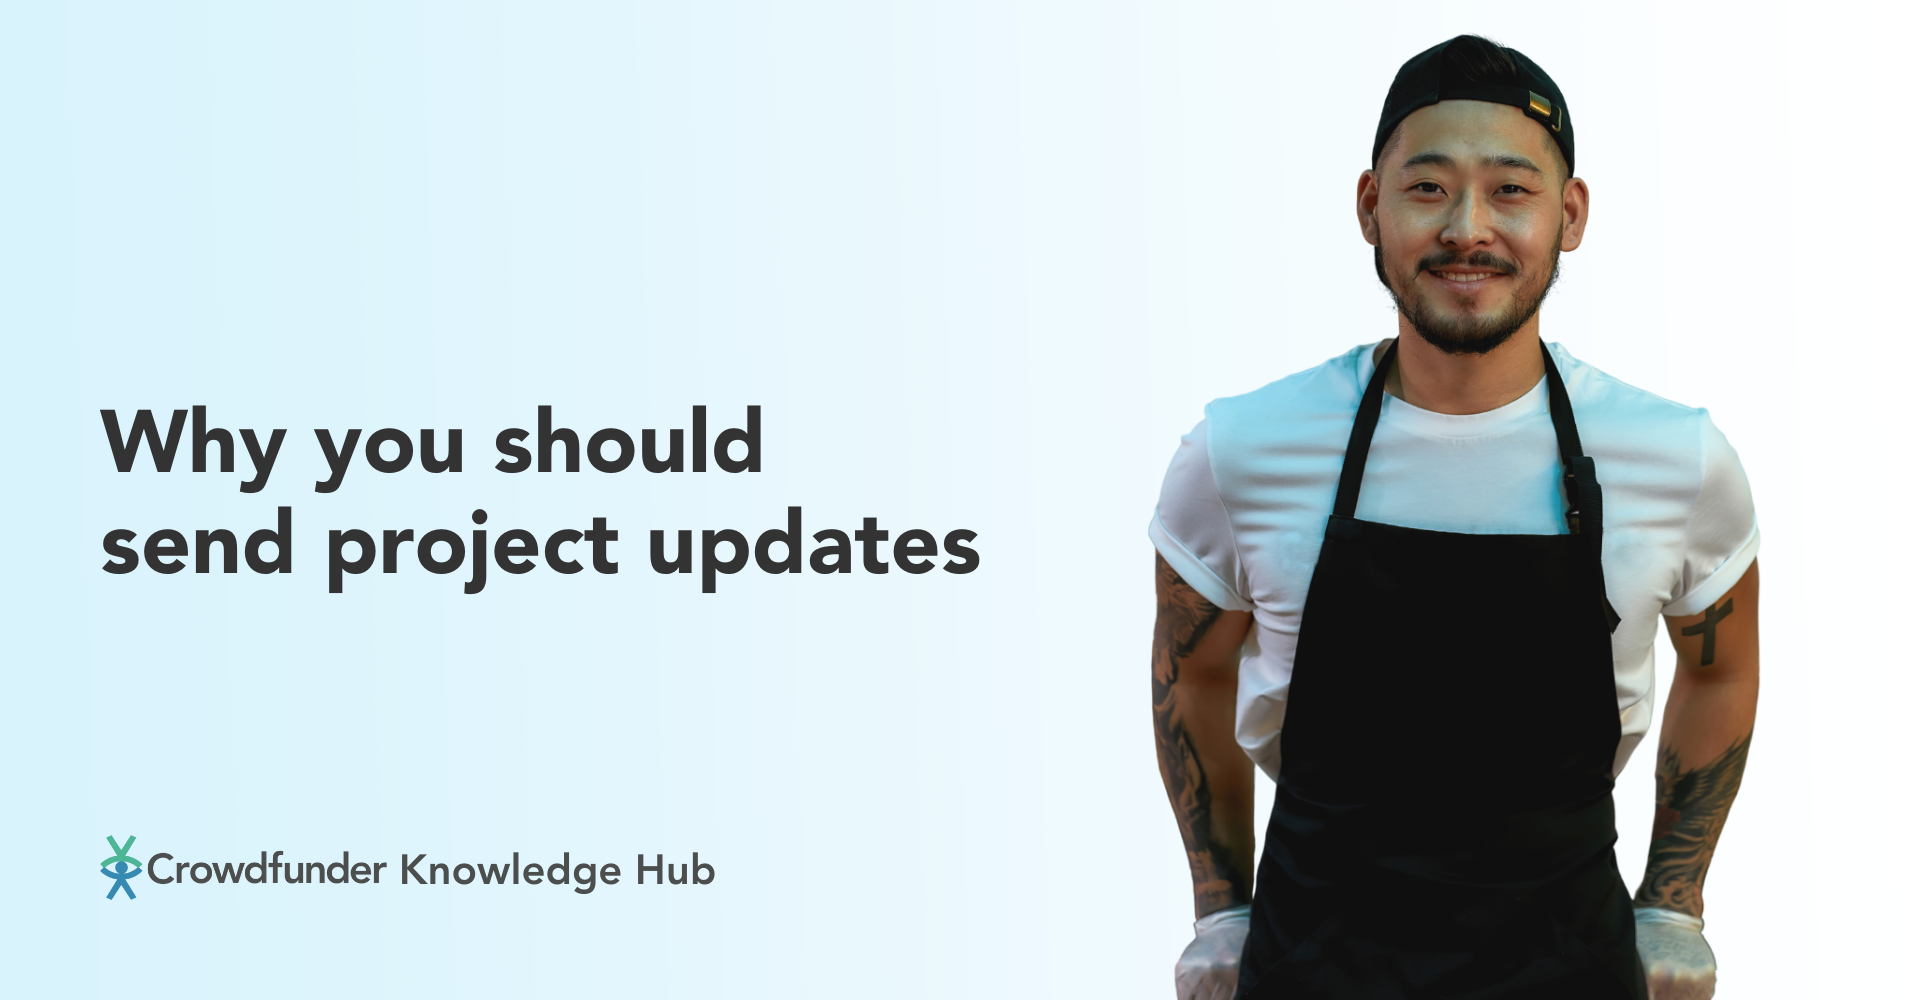 Why you should send project updates